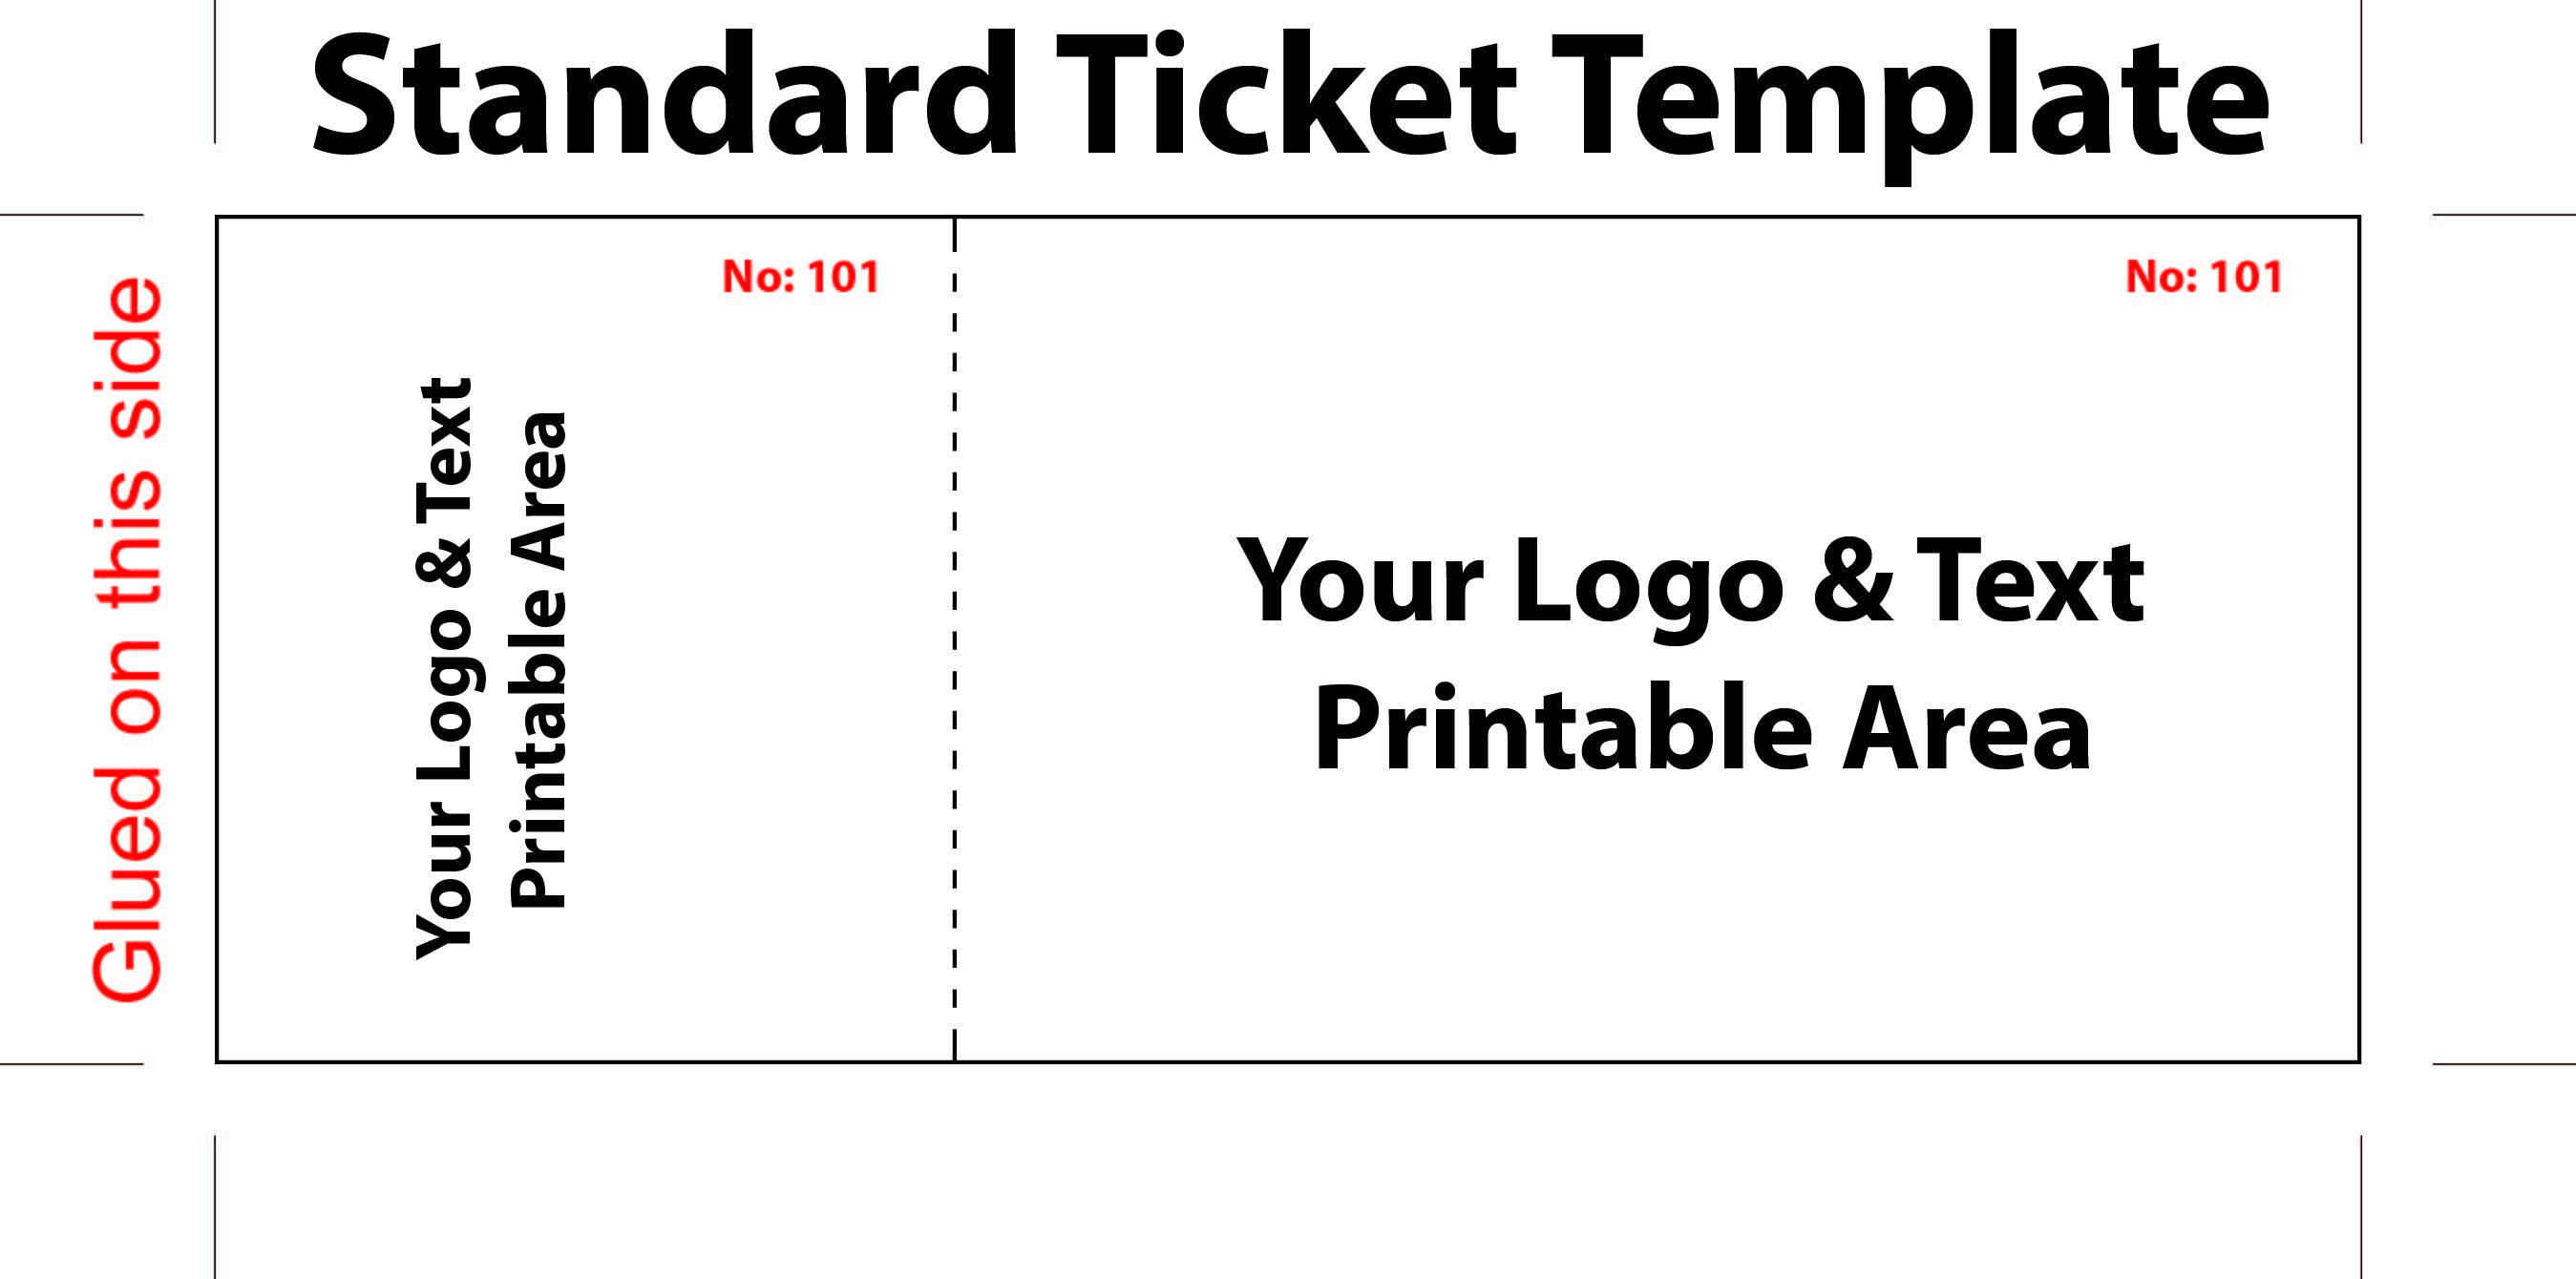 Free Editable Standard Ticket Template Example For Concert With Logo - Free Printable Tickets